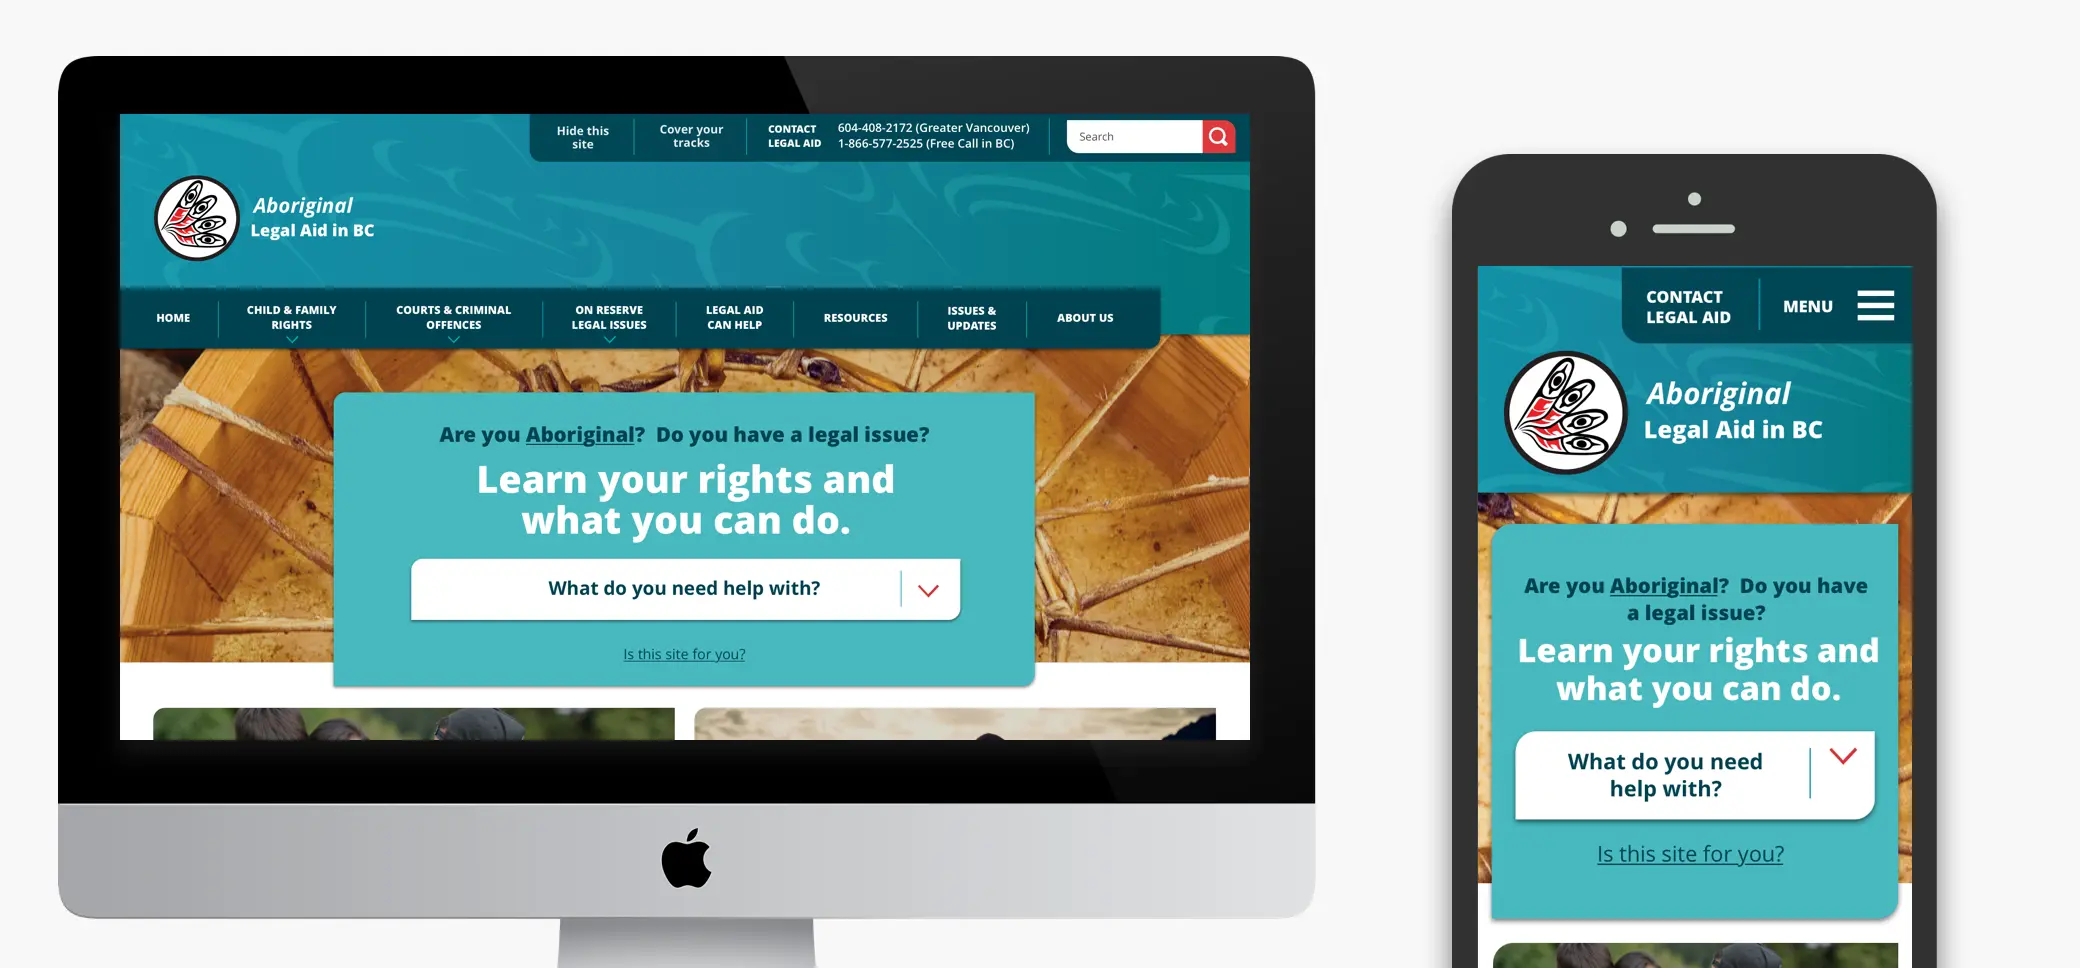 The new Aboriginal legal aid website displayed on a desktop screen and mobile screen.